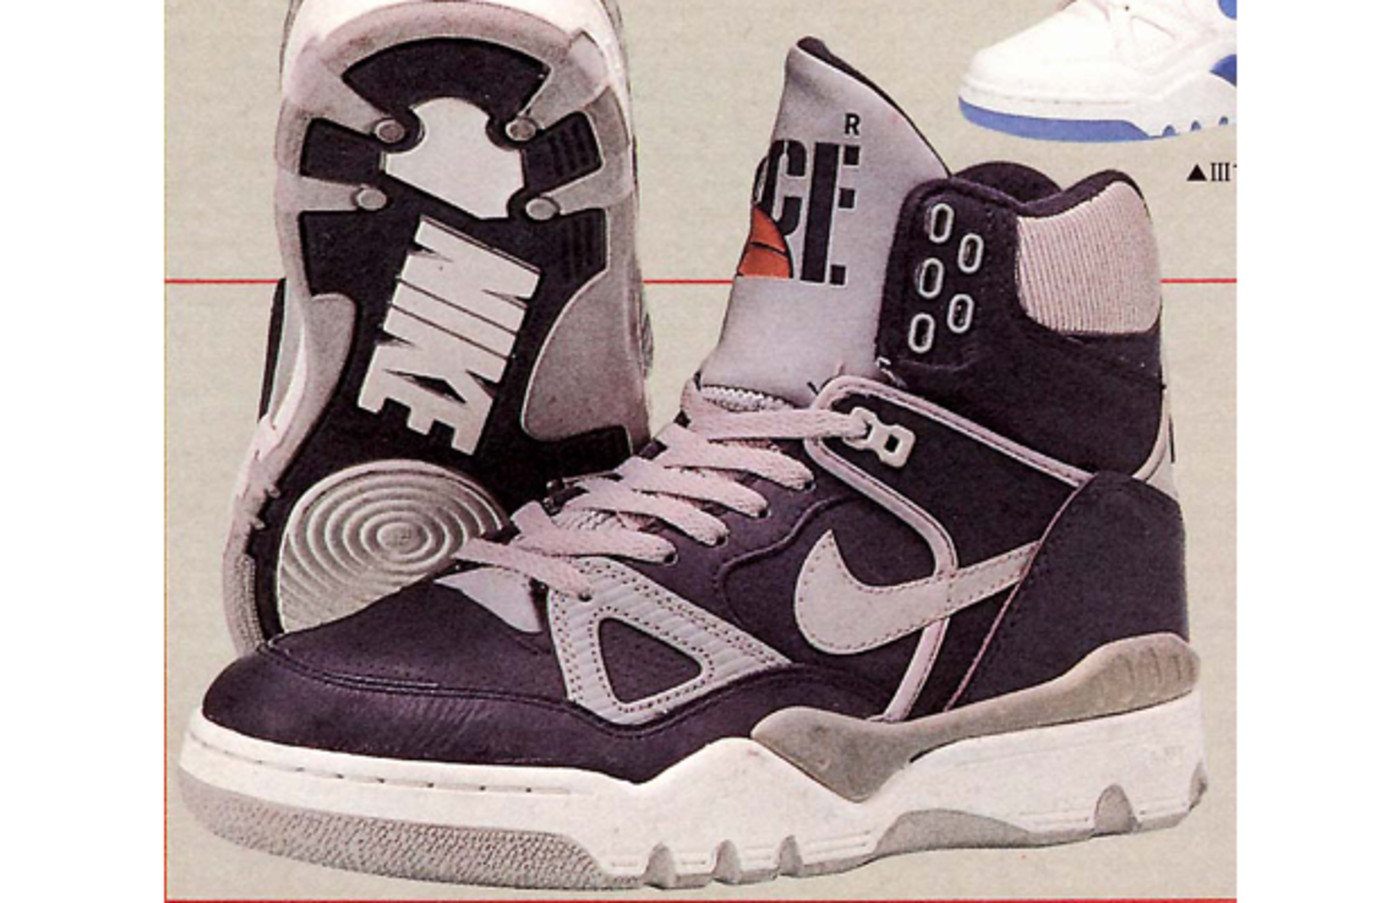 The 100 Best Nike Shoes of All Time 